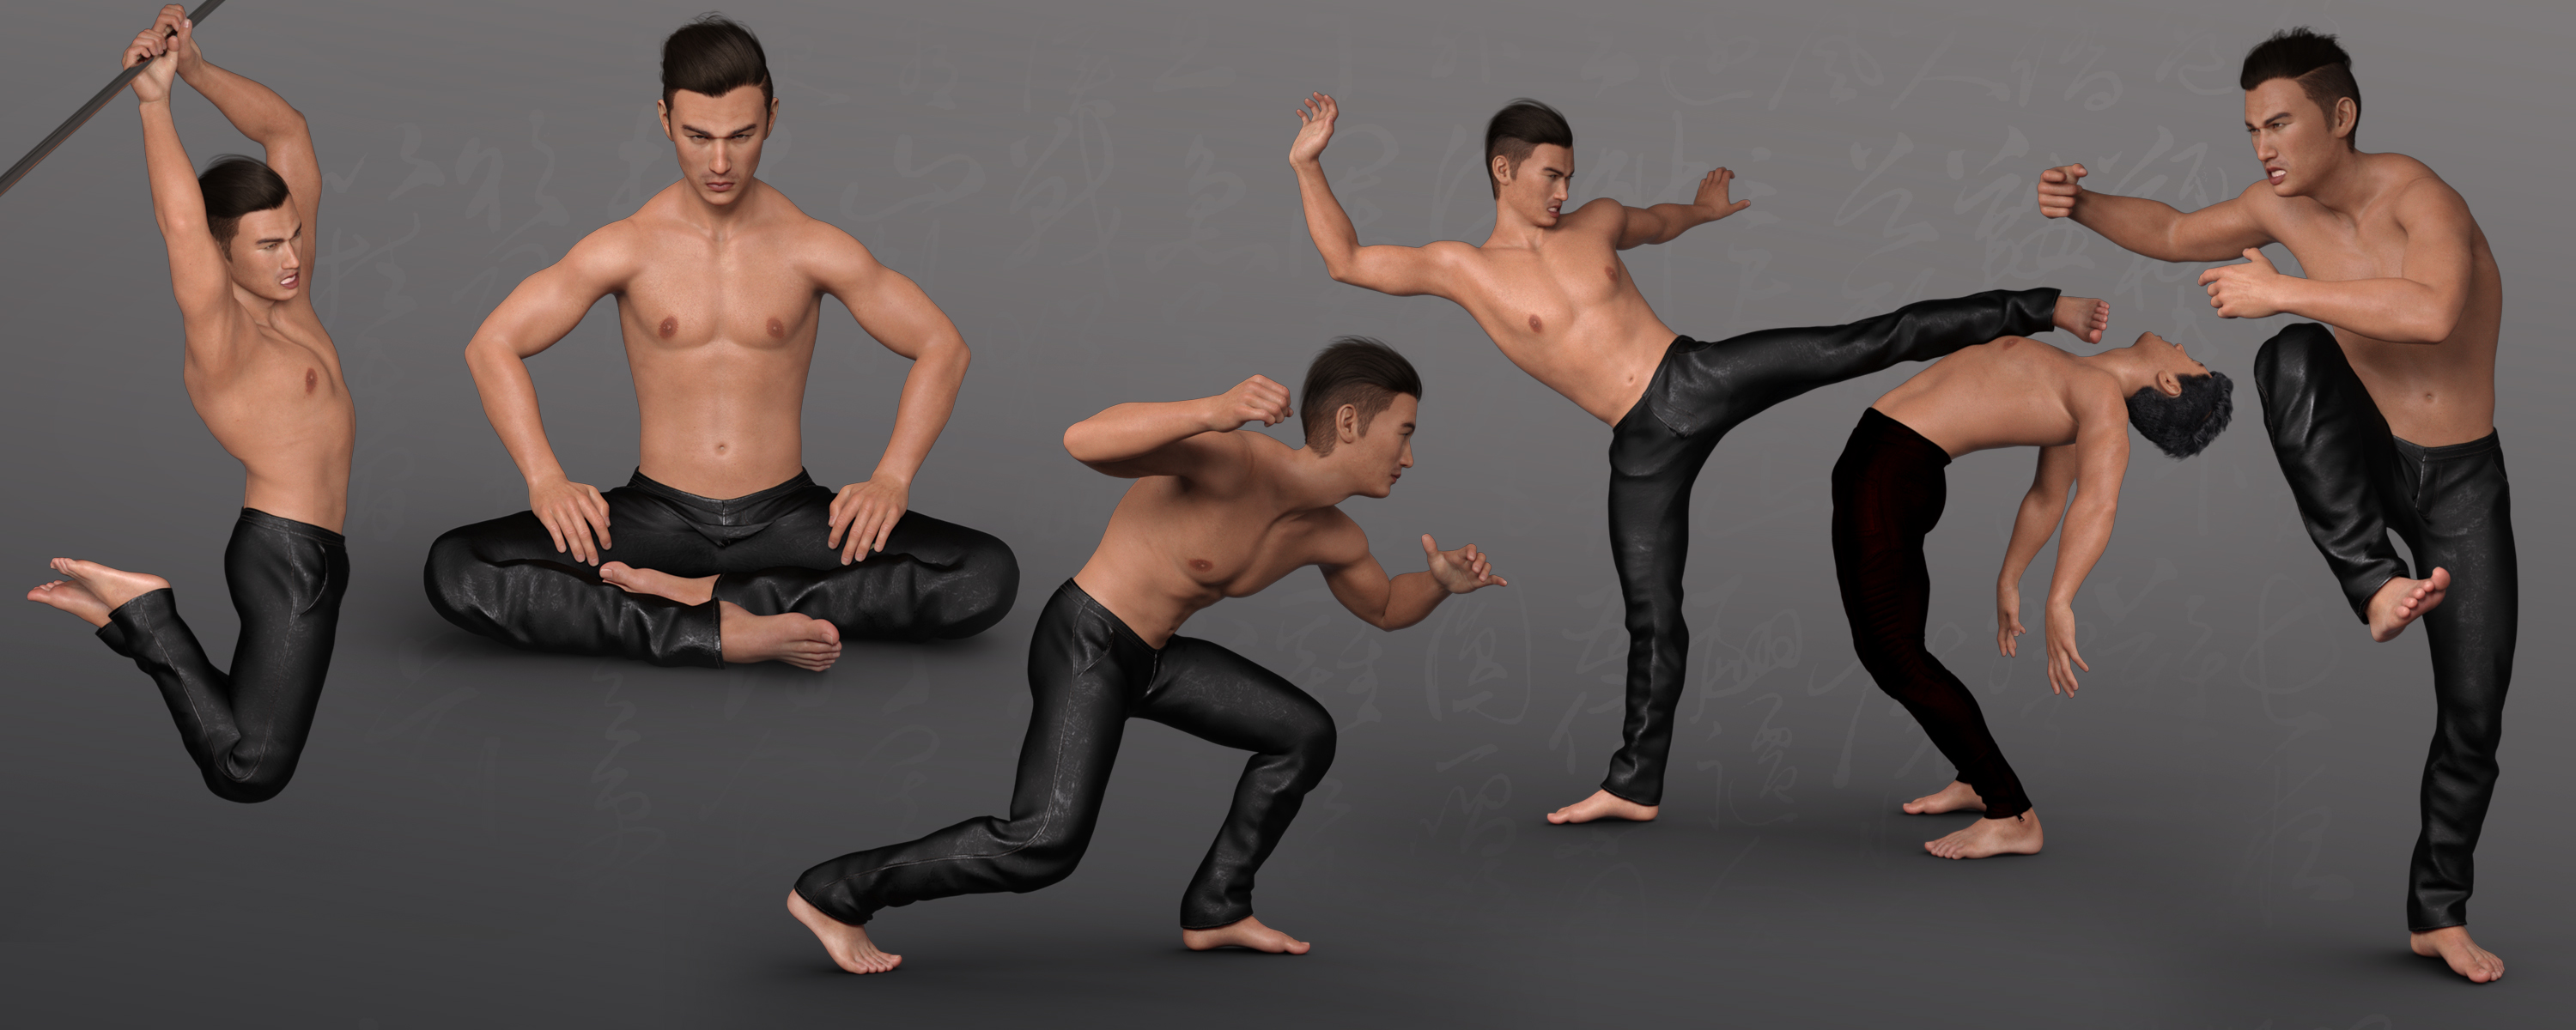 Z Unbroken Spirit - Poses and Expressions for Genesis 8 Male and Lee 8 by: Zeddicuss, 3D Models by Daz 3D